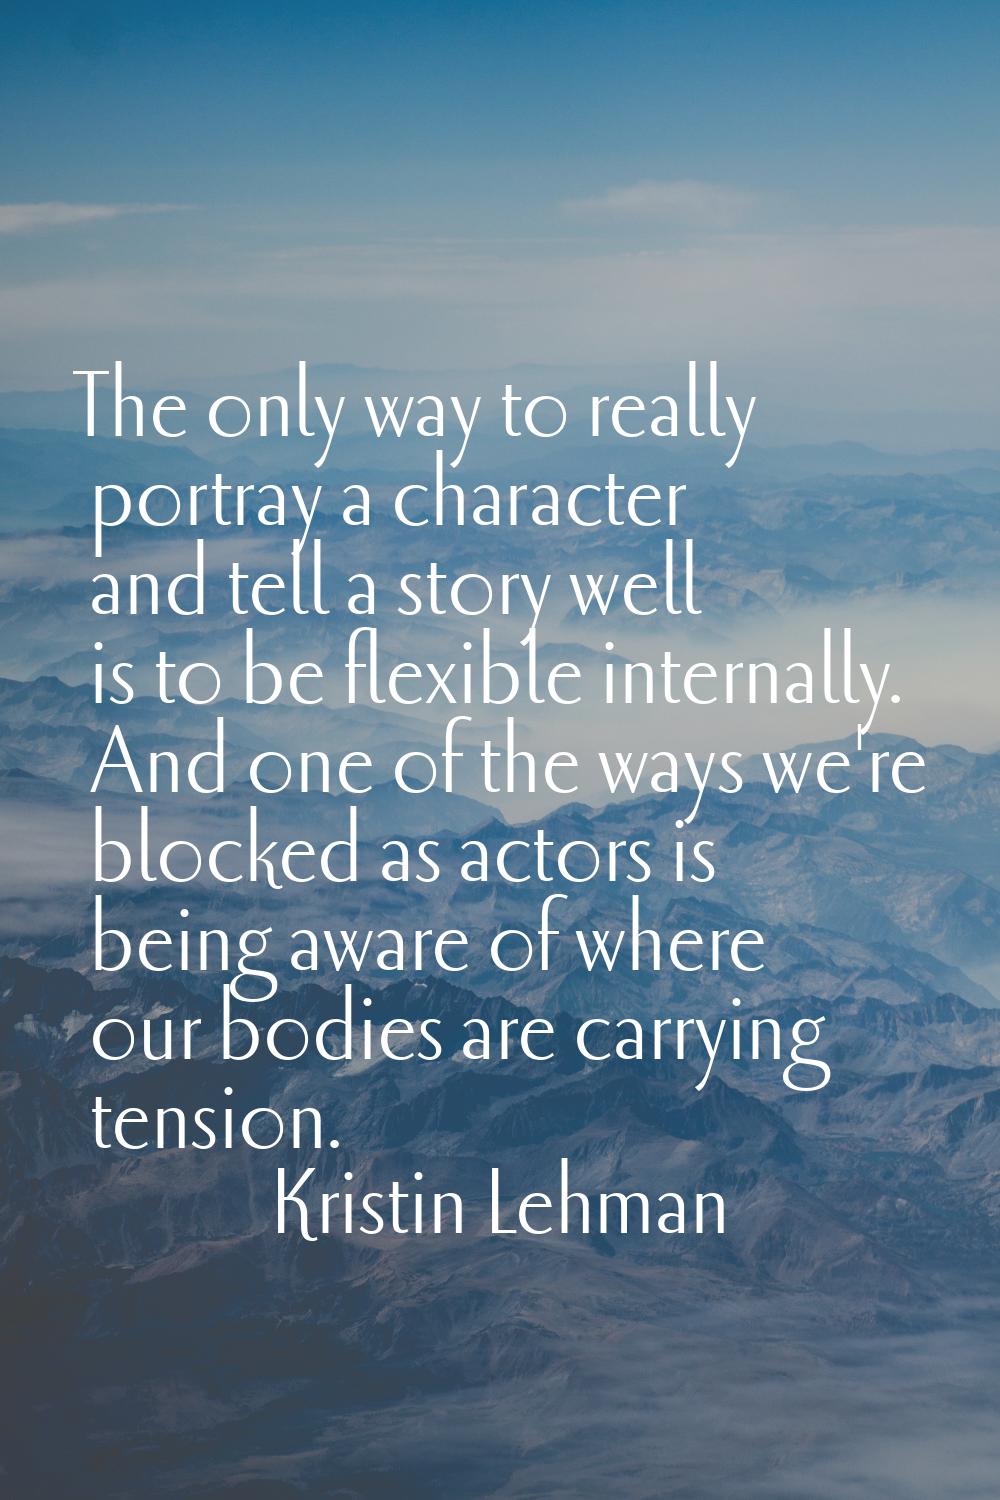 The only way to really portray a character and tell a story well is to be flexible internally. And 